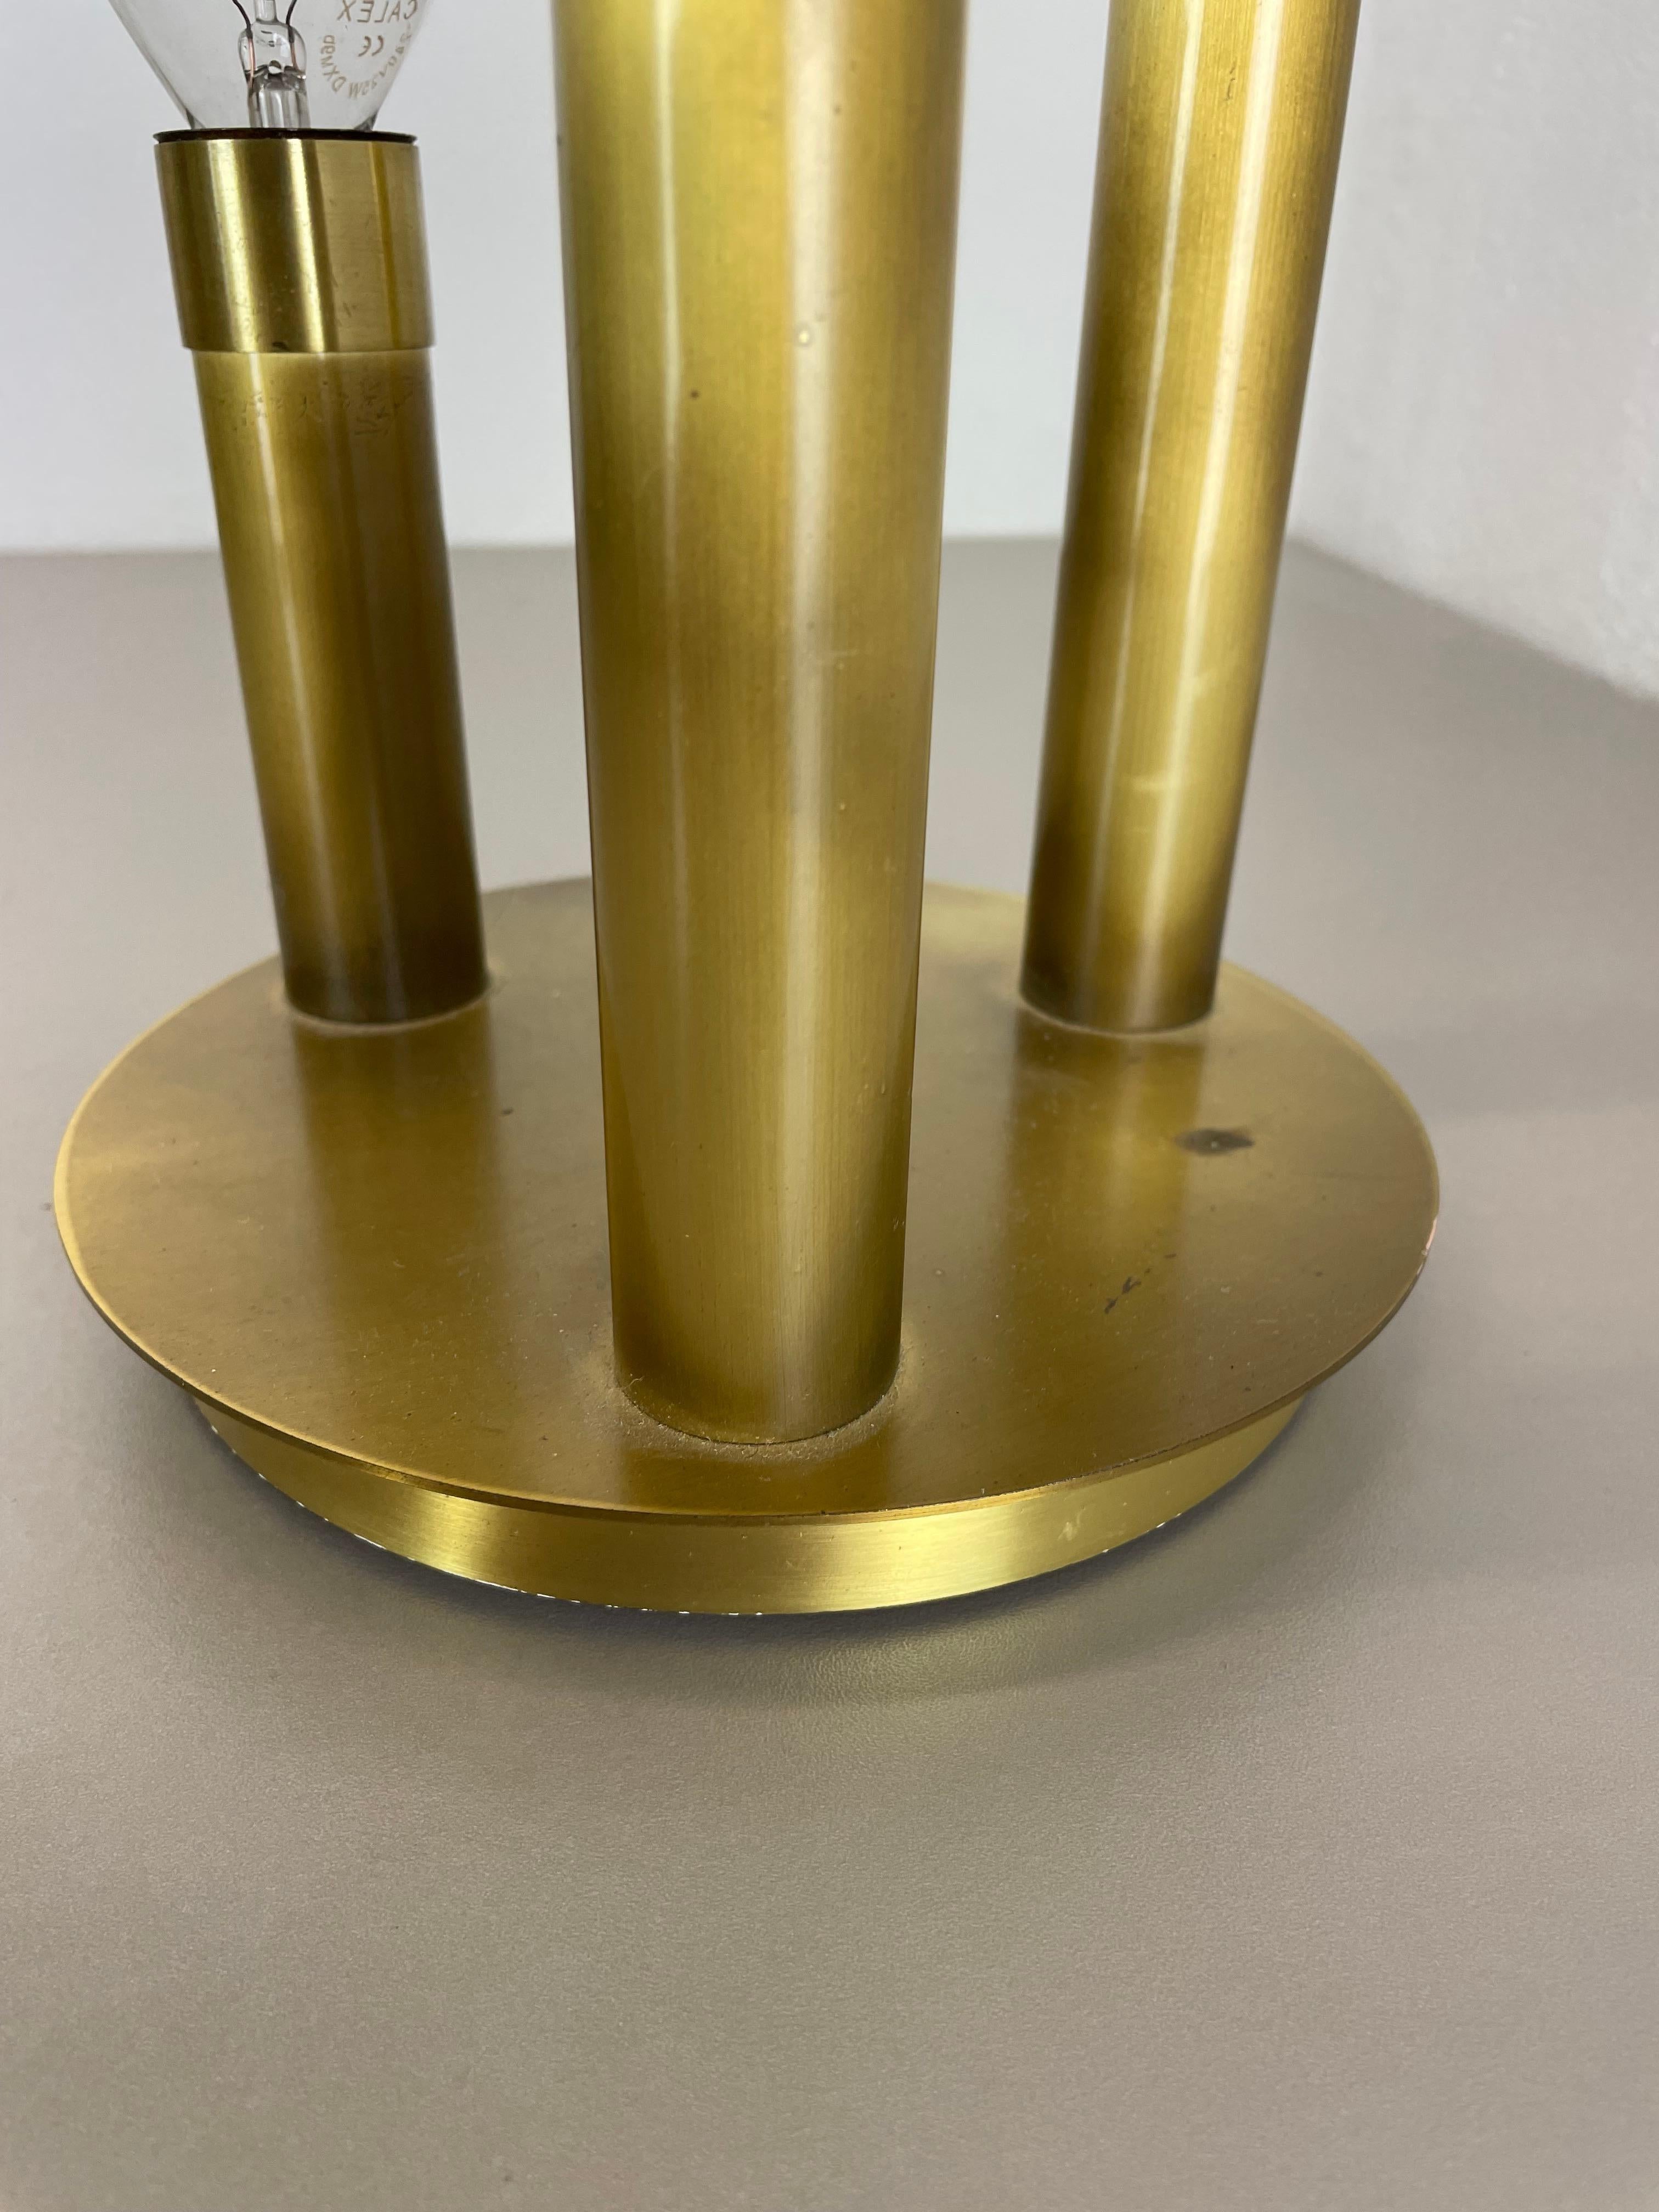 Brass Italian Stilnovo Style Atomic Space Age Ceiling Light Sconces, Italy, 1970 For Sale 5